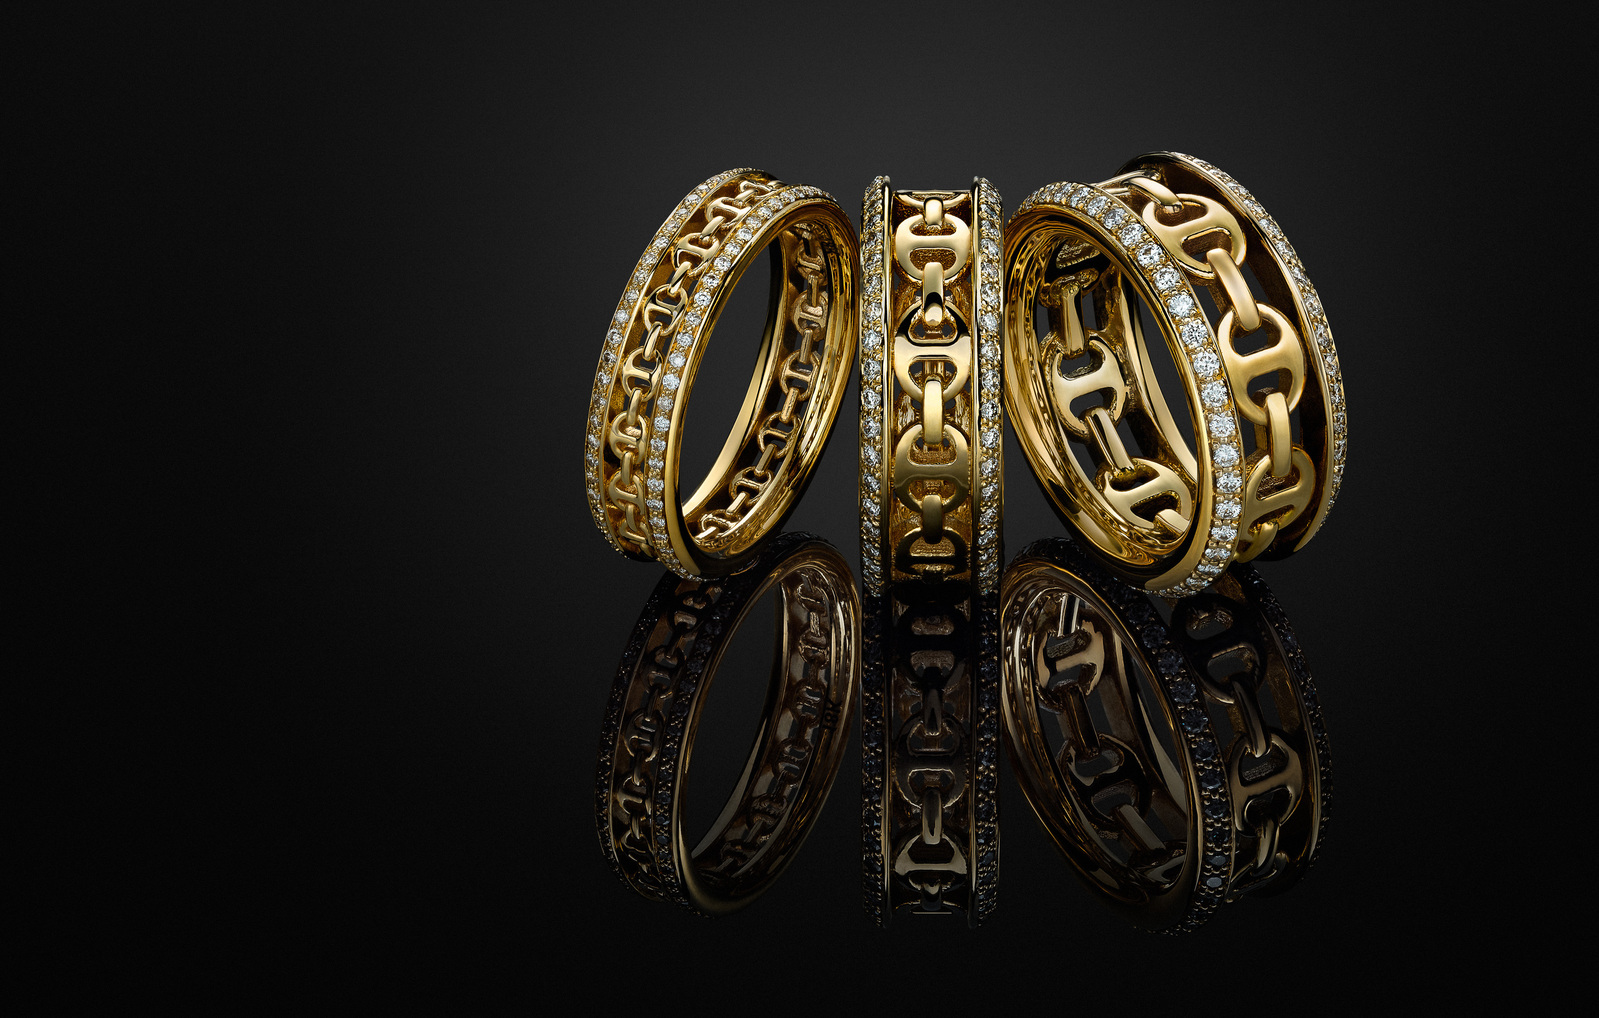 Elegant Jewelry product photography by commercial and advertising photographer Timothy Hogan in Los Angeles